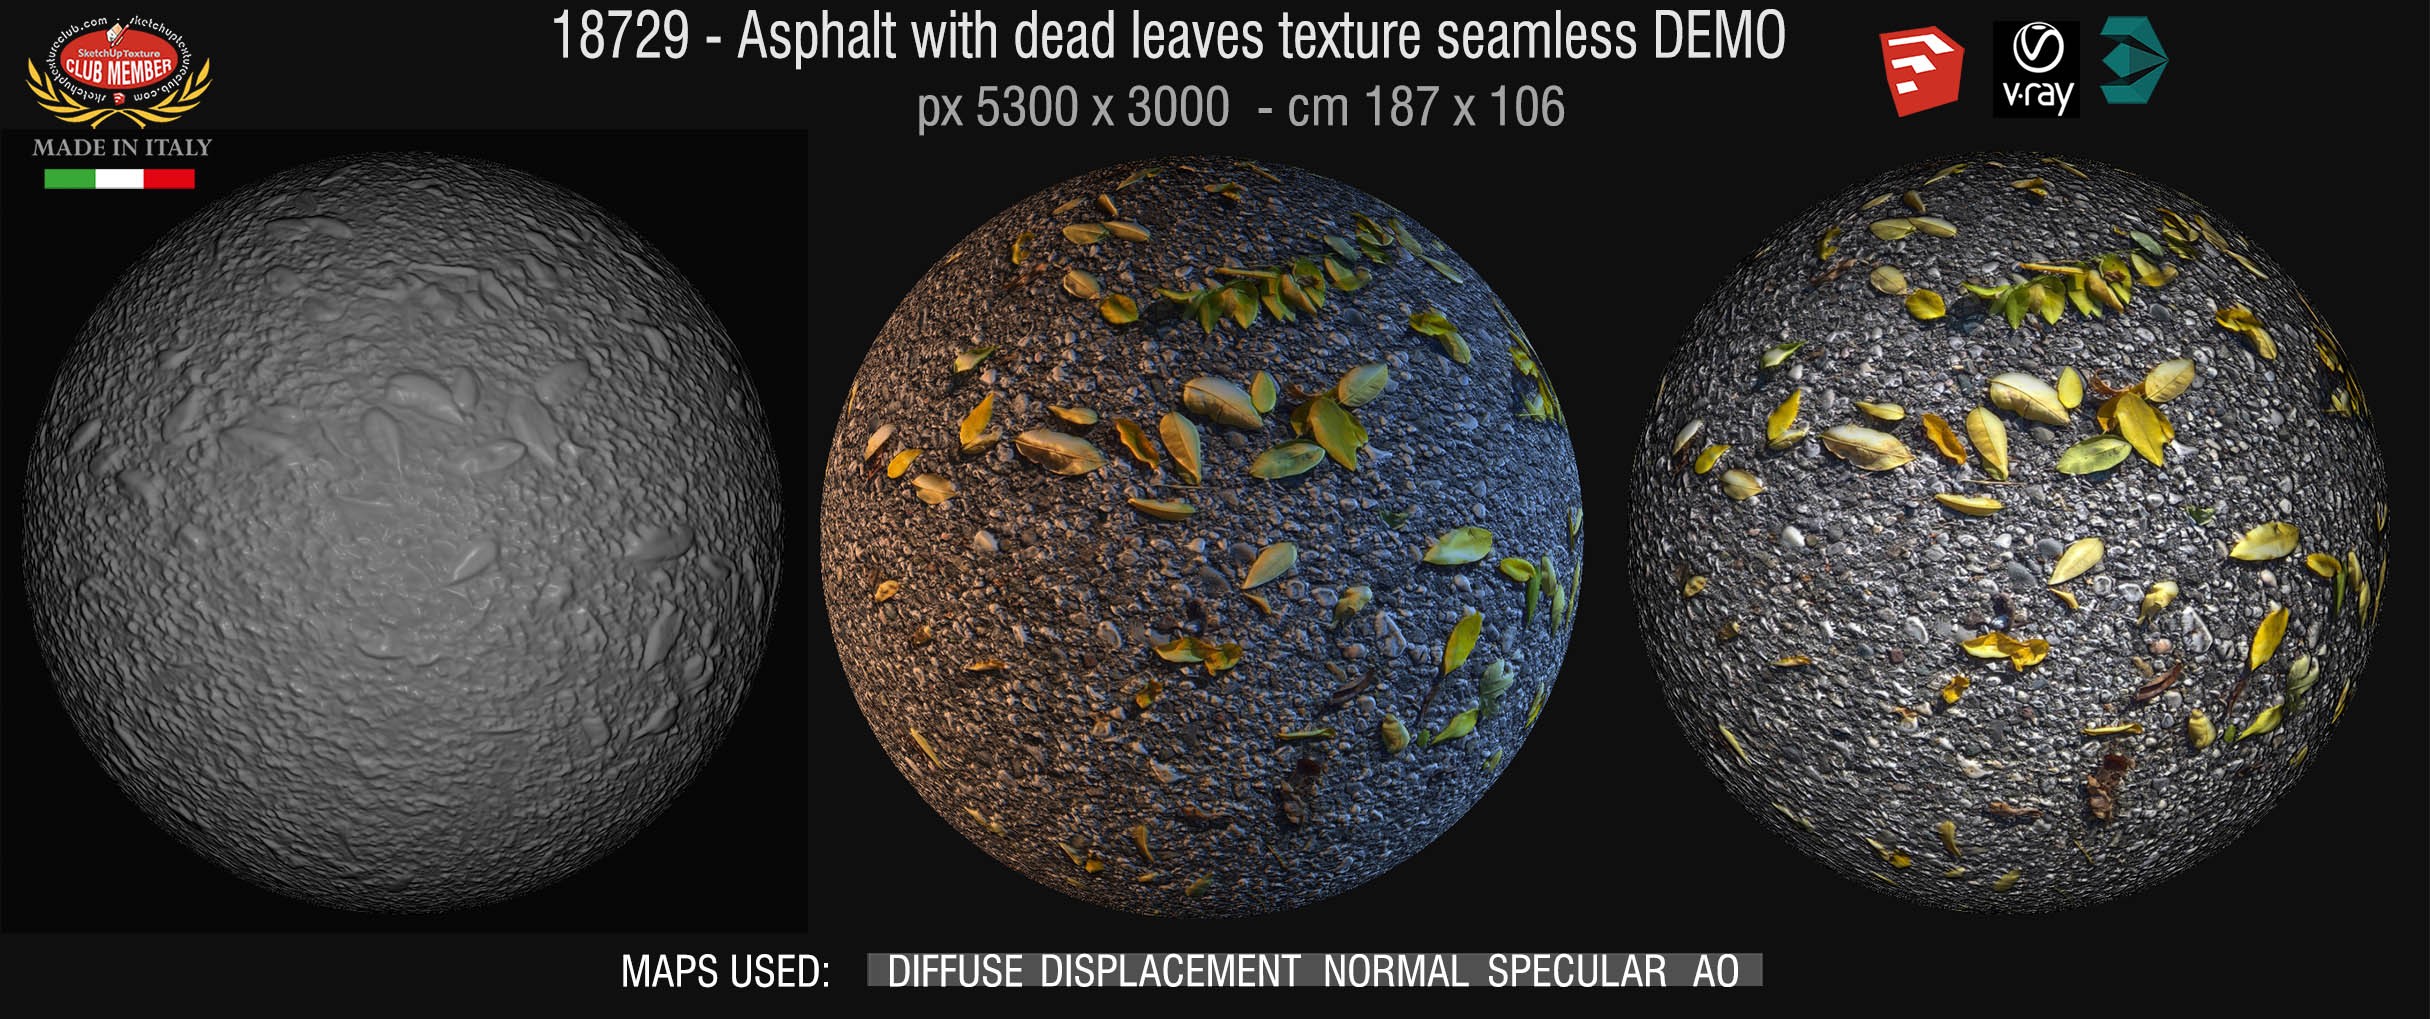 19729 Asphalt with dead leaves texture seamless + maps DEMO